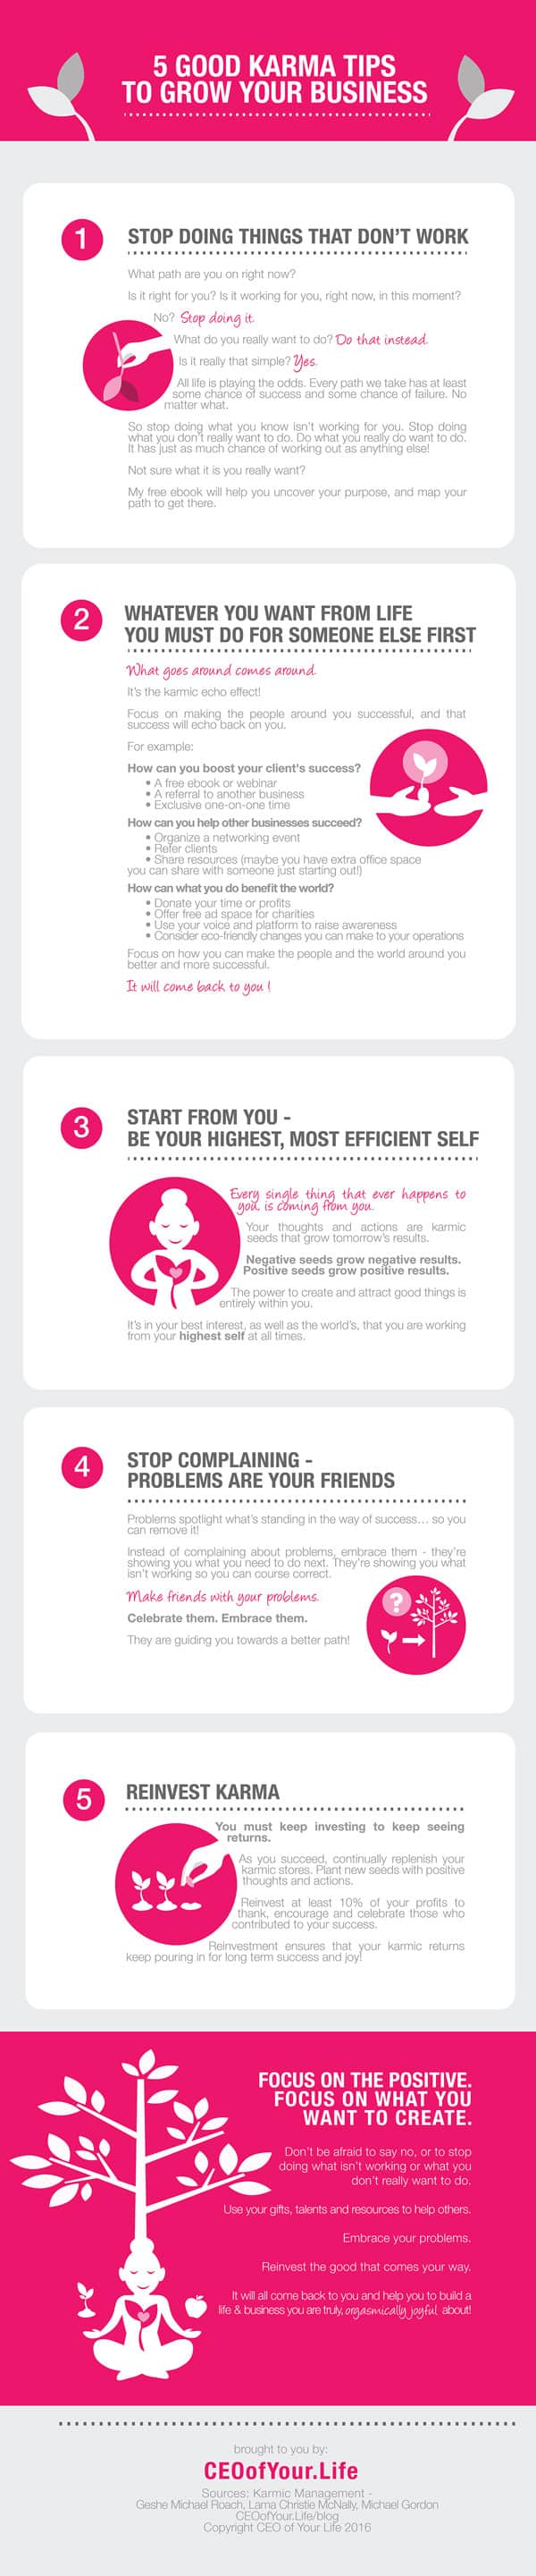 5 Good Karma Tips to Grow Your Business - An Infographic from Create an orgasmically joyful life & business